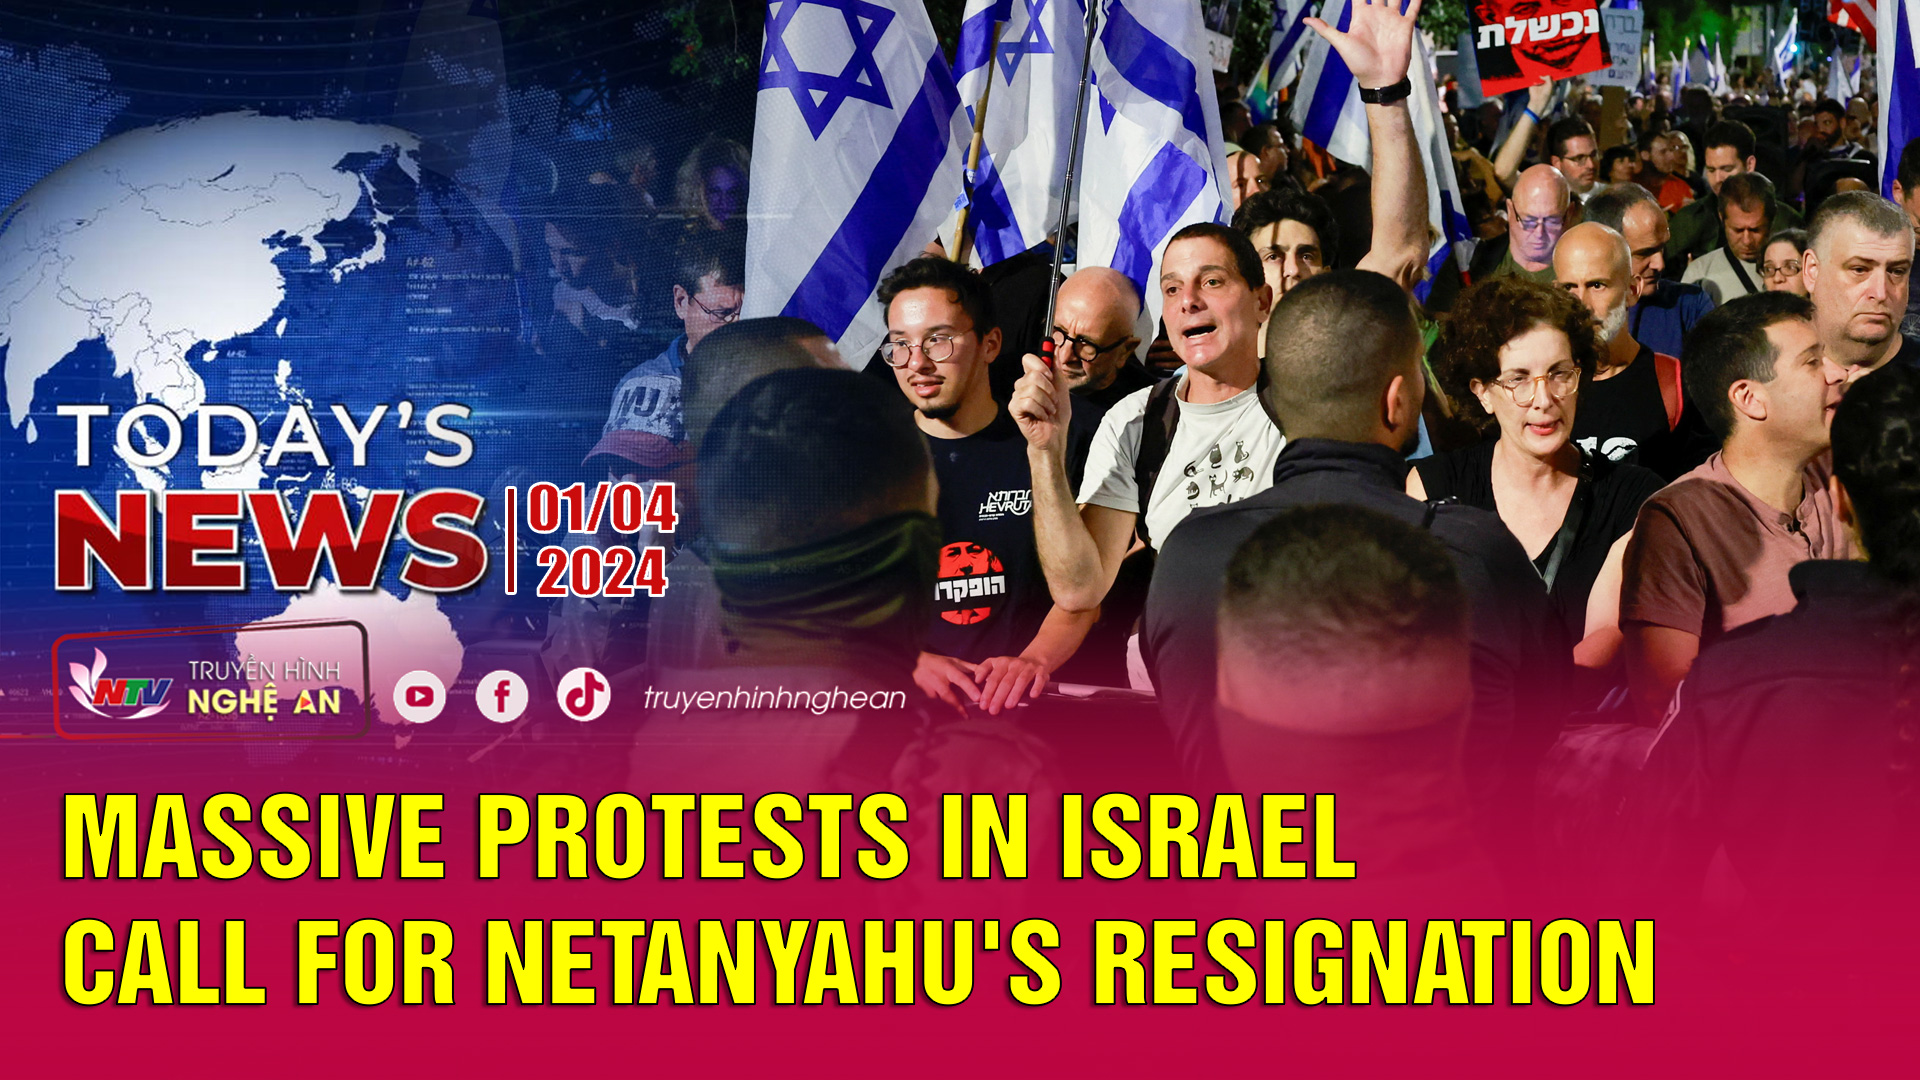 Today's News 01/4/2024: Massive protests in Israel call for Netanyahu's resignation